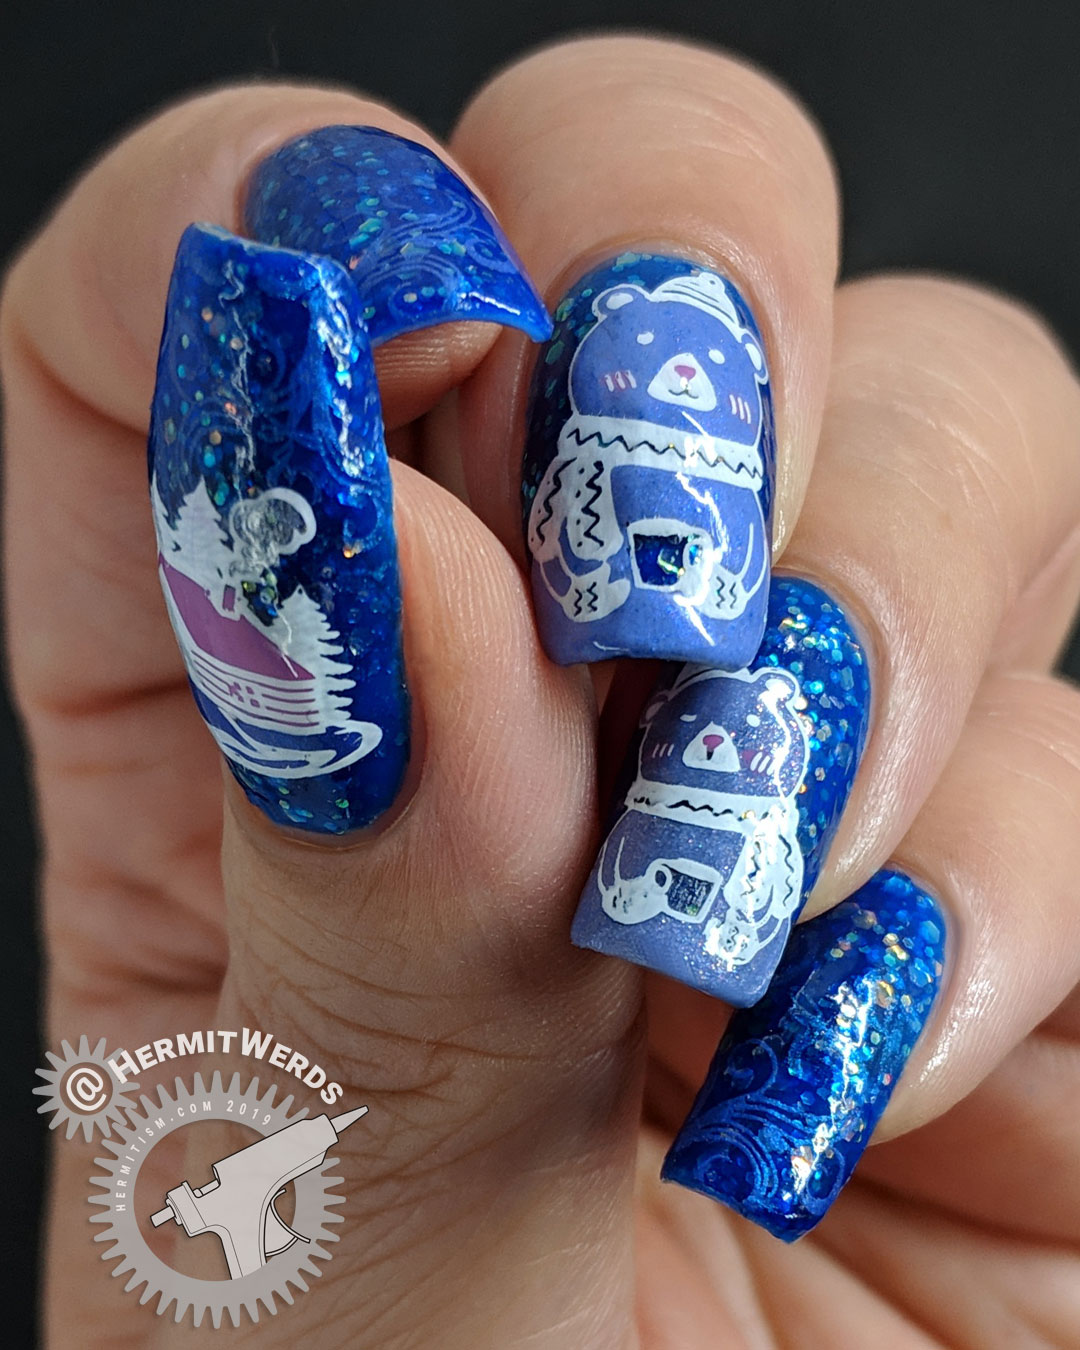 Tea for Two - Hermit Werds - two blurple stamping decal bears drinking tea against a jelly background with opalescent glitters